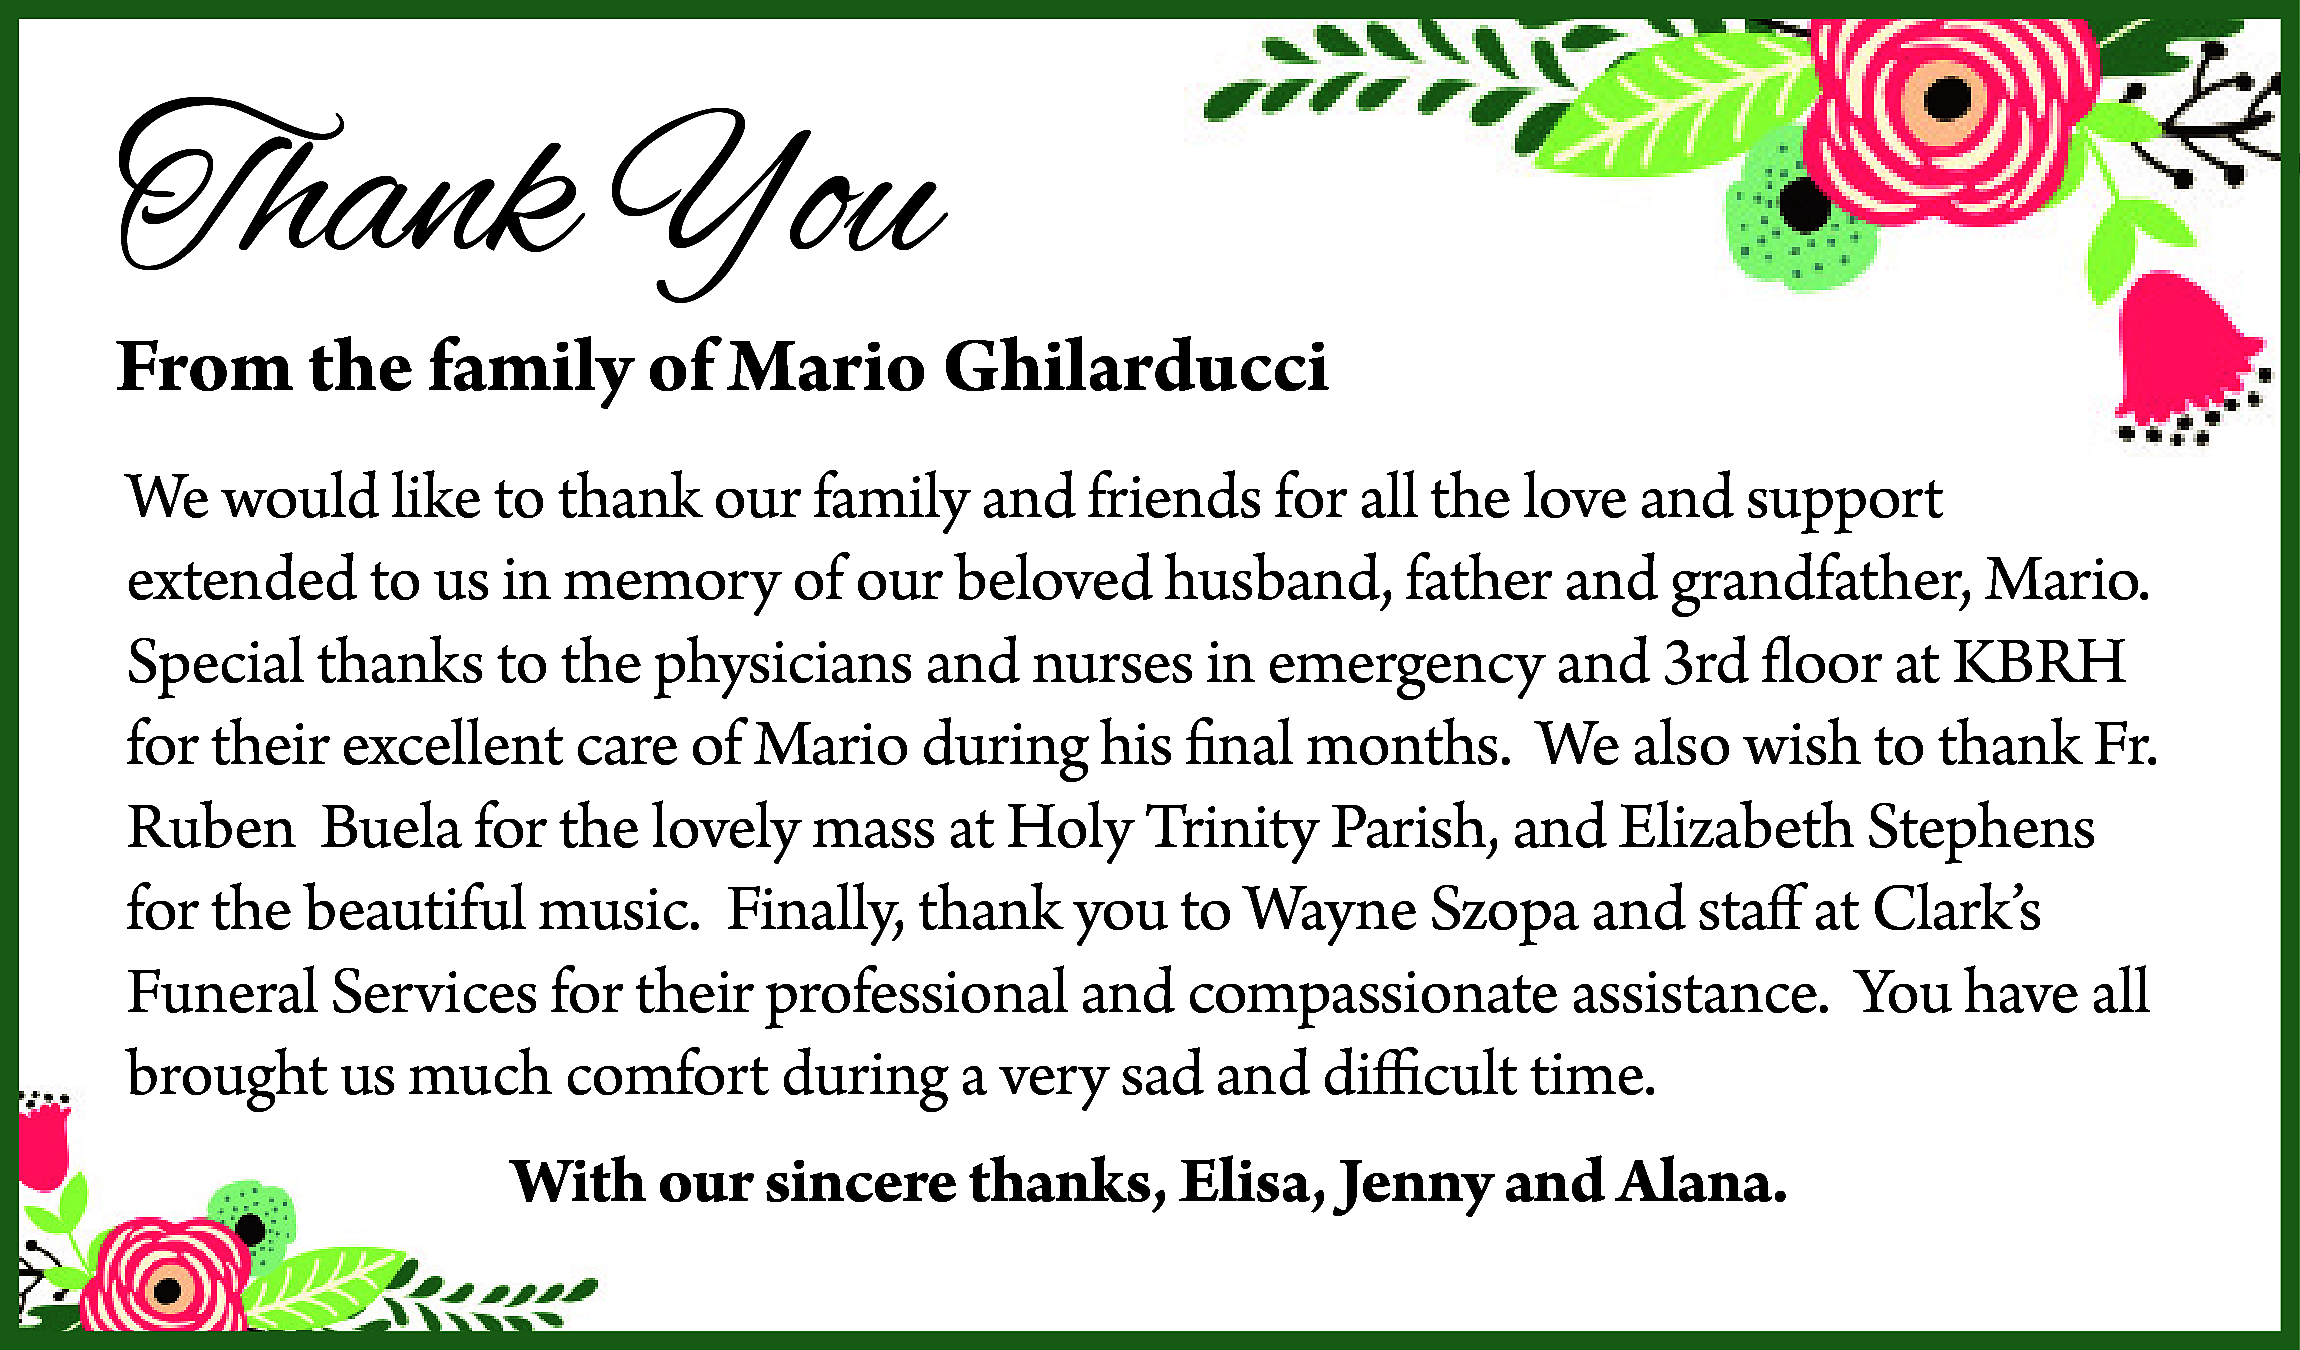 Thank You <br> <br>From the  Thank You    From the family of Mario Ghilarducci  We would like to thank our family and friends for all the love and support  extended to us in memory of our beloved husband, father and grandfather, Mario.  Special thanks to the physicians and nurses in emergency and 3rd floor at KBRH  for their excellent care of Mario during his final months. We also wish to thank Fr.  Ruben Buela for the lovely mass at Holy Trinity Parish, and Elizabeth Stephens  for the beautiful music. Finally, thank you to Wayne Szopa and staff at Clark’s  Funeral Services for their professional and compassionate assistance. You have all  brought us much comfort during a very sad and difficult time.  With our sincere thanks, Elisa, Jenny and Alana.    